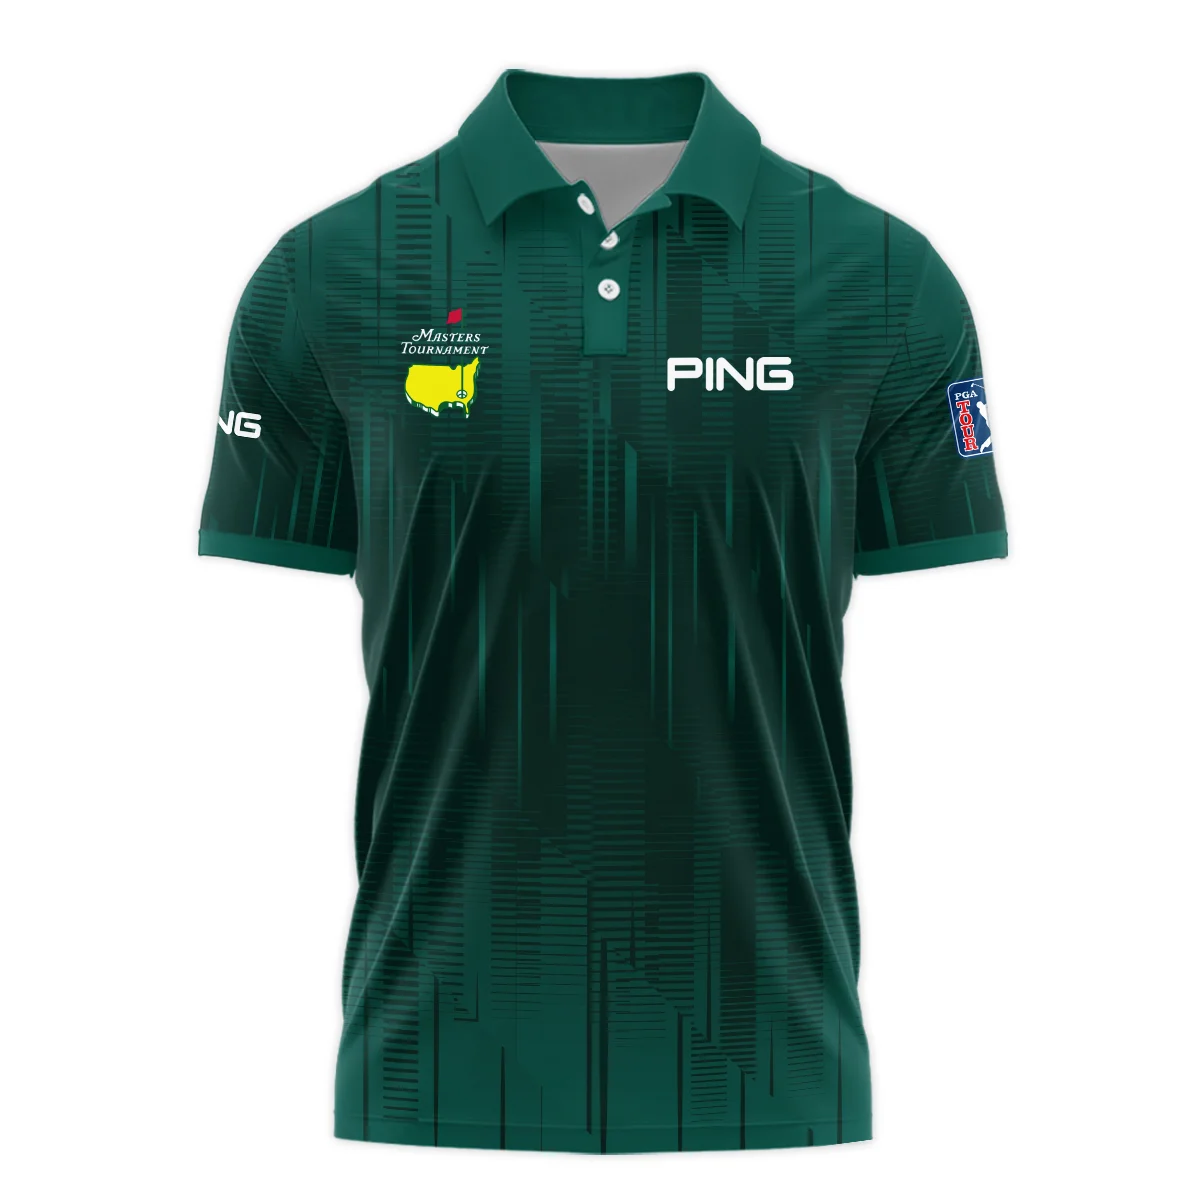 Masters Tournament Ping Dark Green Gradient Stripes Pattern Vneck Long Polo Shirt Style Classic Long Polo Shirt For Men